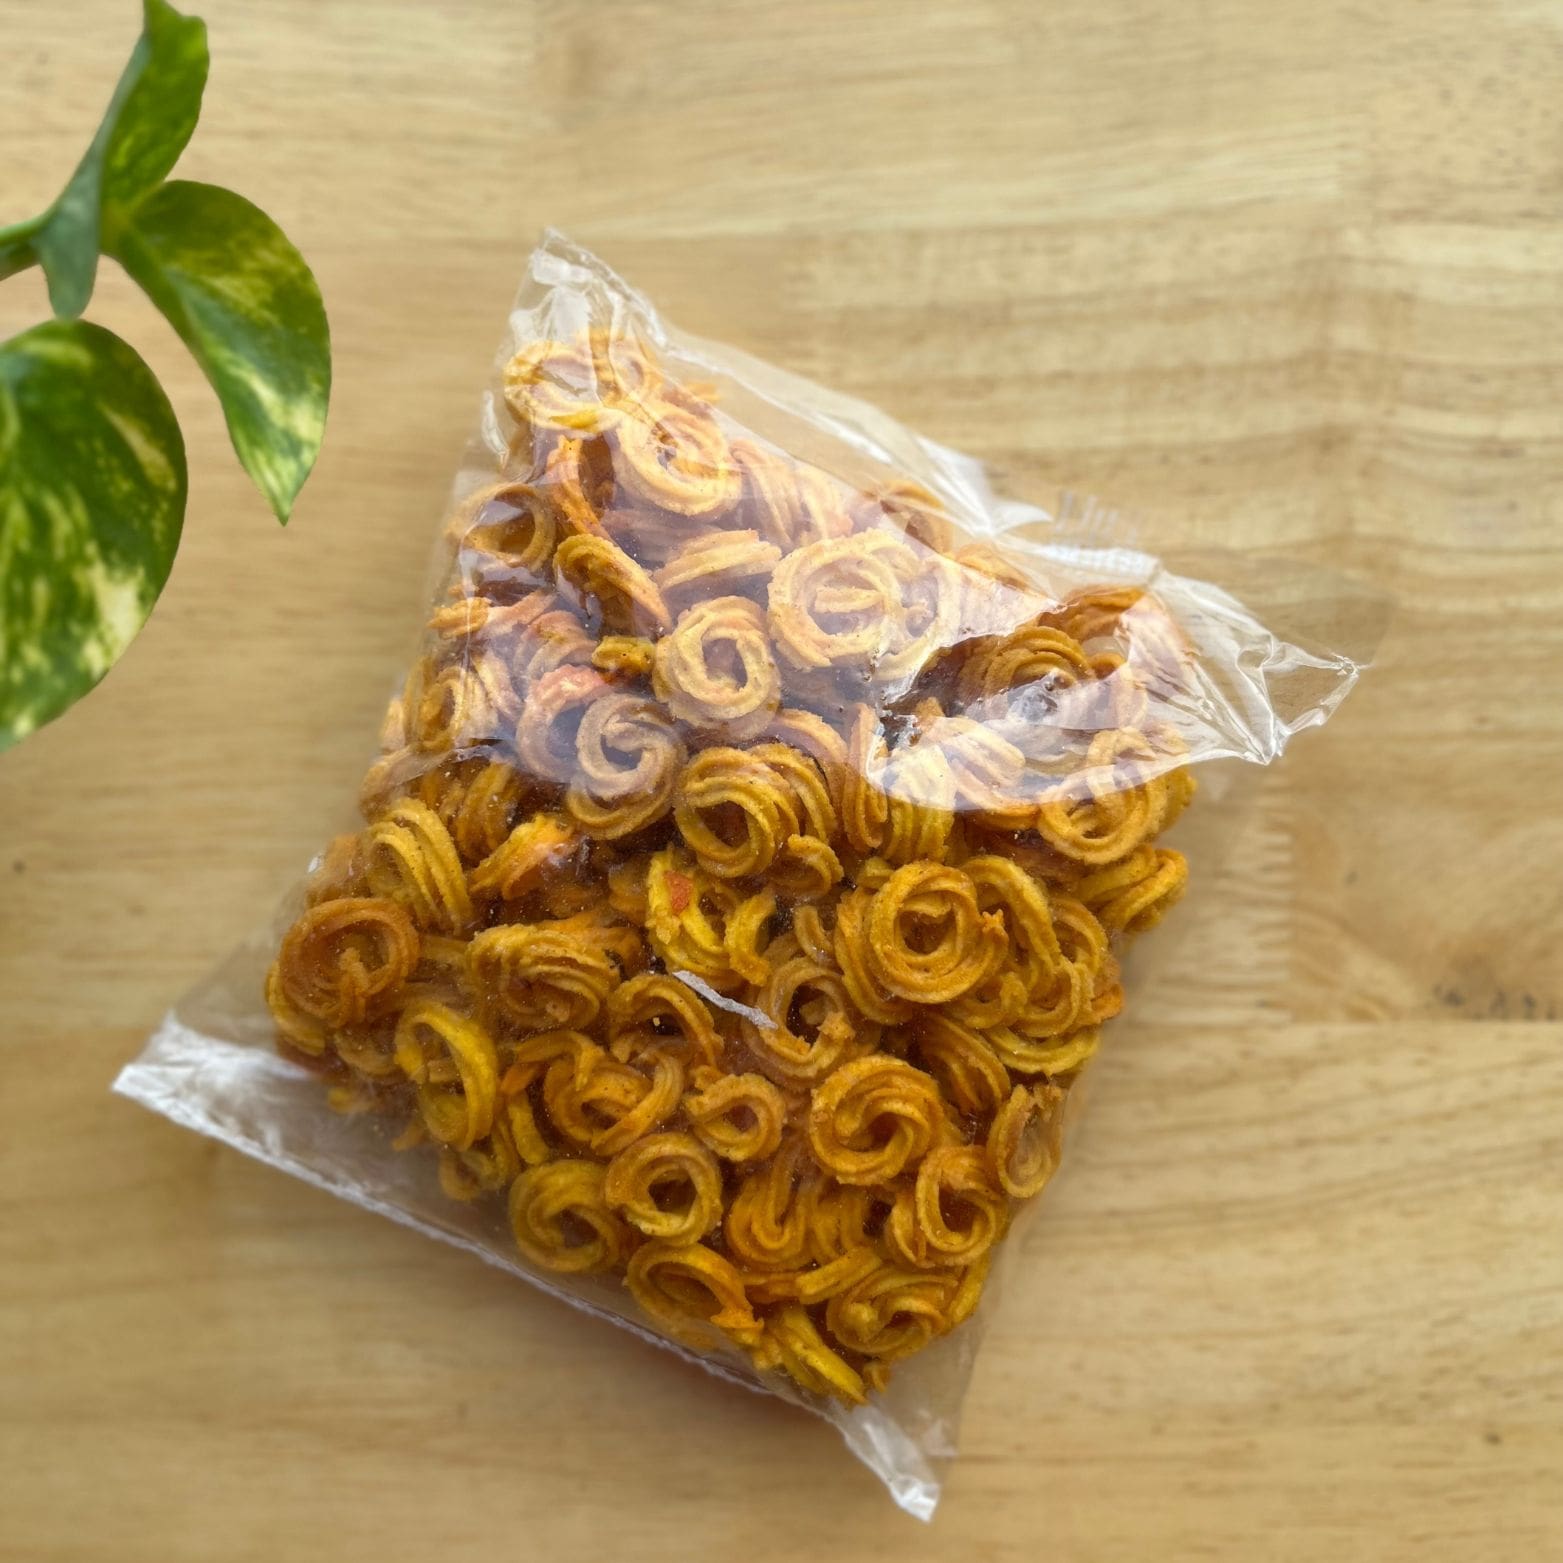 organic Millet Chakli - Online store for organic products in Bangalore - Healthy Natural Snacks |